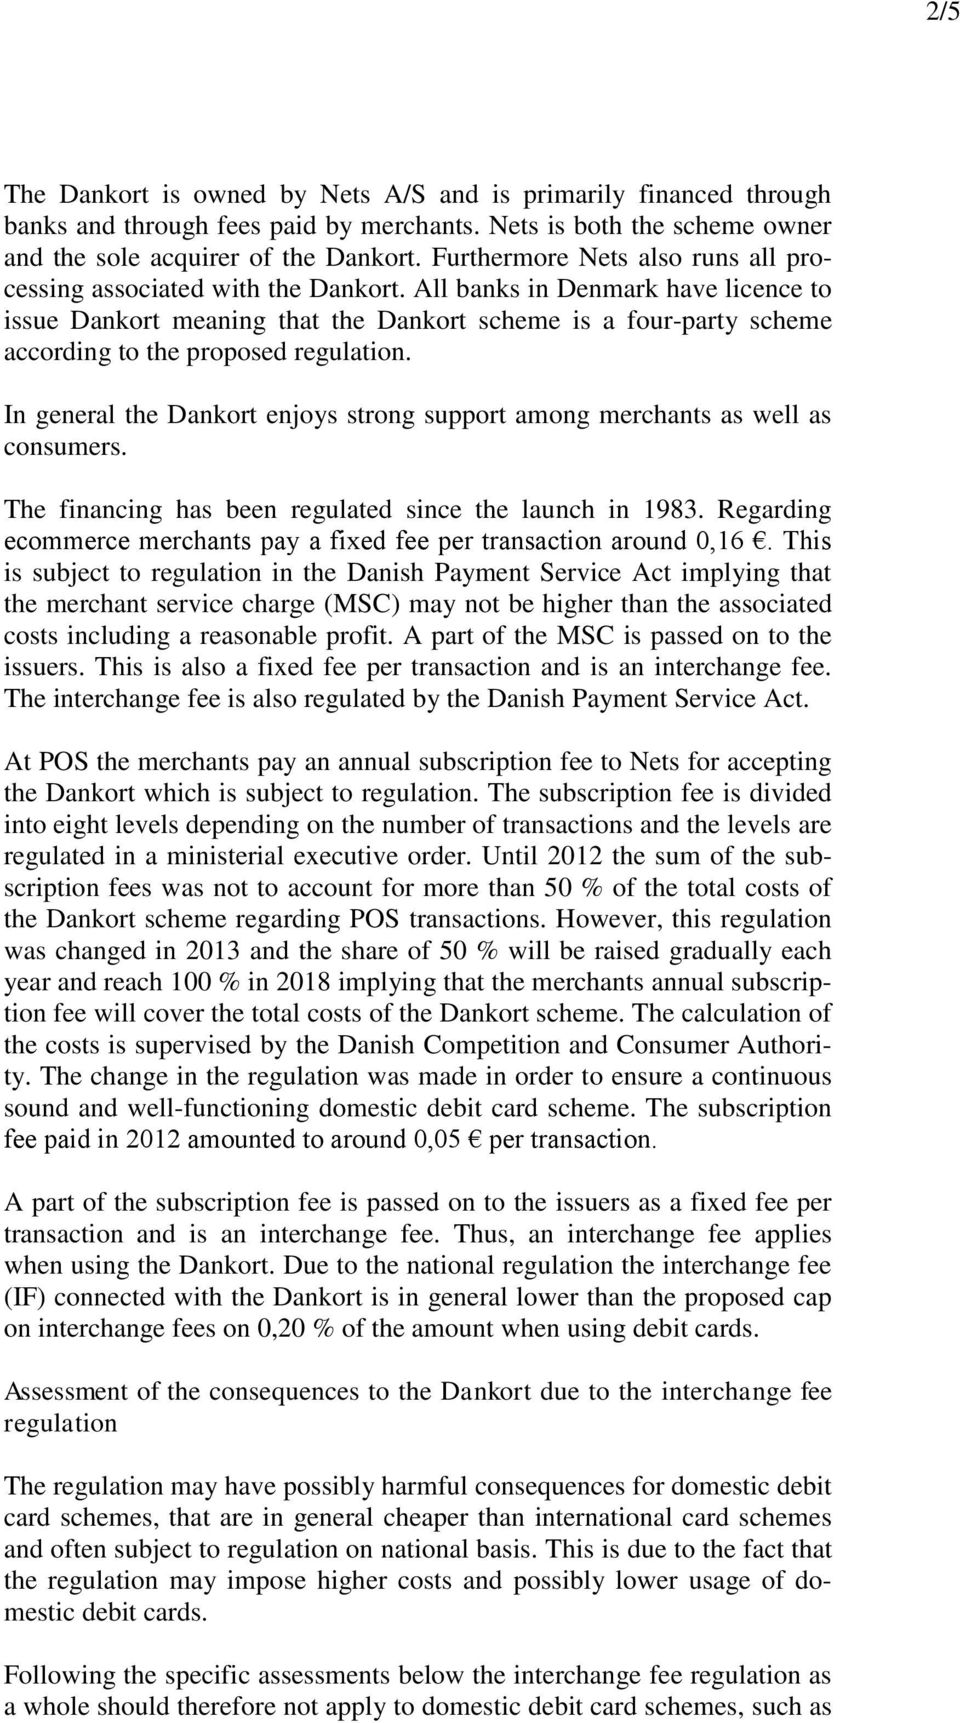 All banks in Denmark have licence to issue Dankort meaning that the Dankort scheme is a four-party scheme according to the proposed regulation.